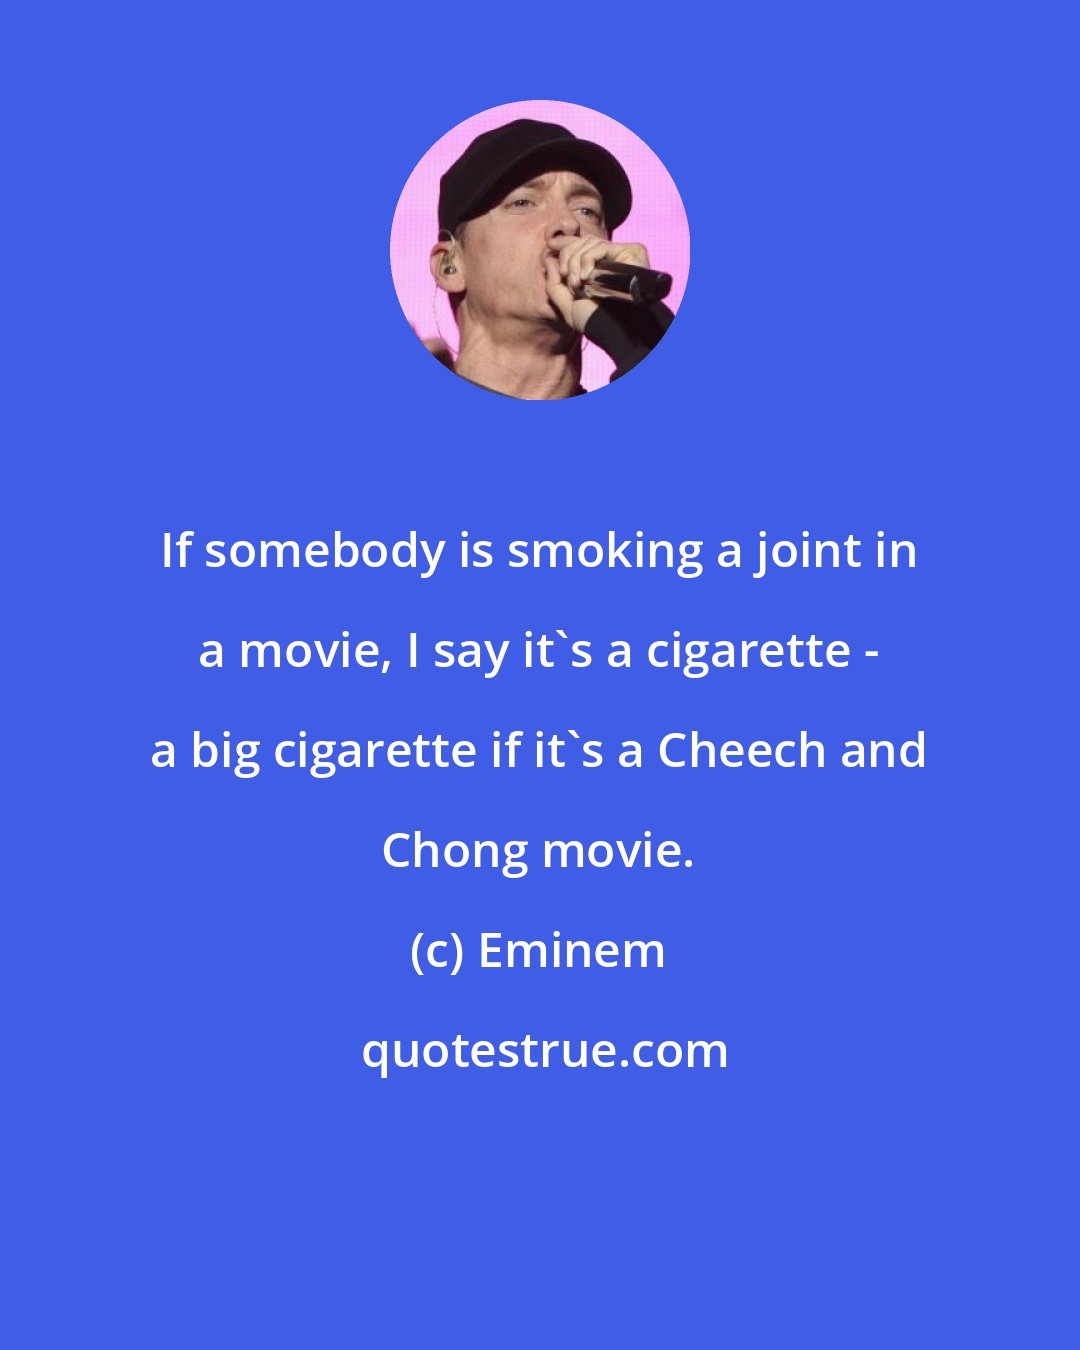 Eminem: If somebody is smoking a joint in a movie, I say it's a cigarette - a big cigarette if it's a Cheech and Chong movie.